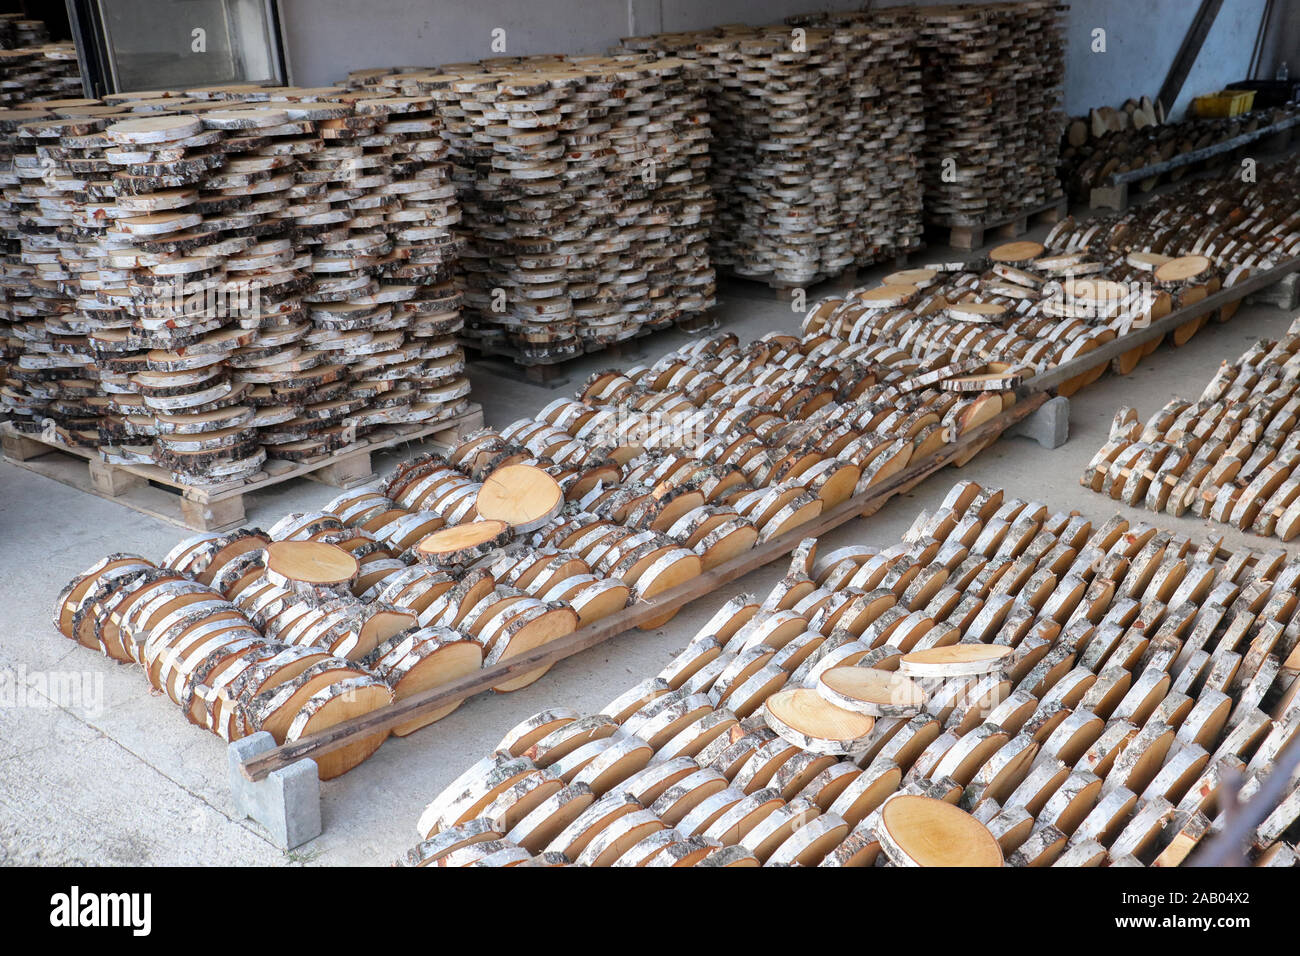 Wood industry - Bunch of Circle cutted pieces of birch trees in the wood industry factory. Stock Photo